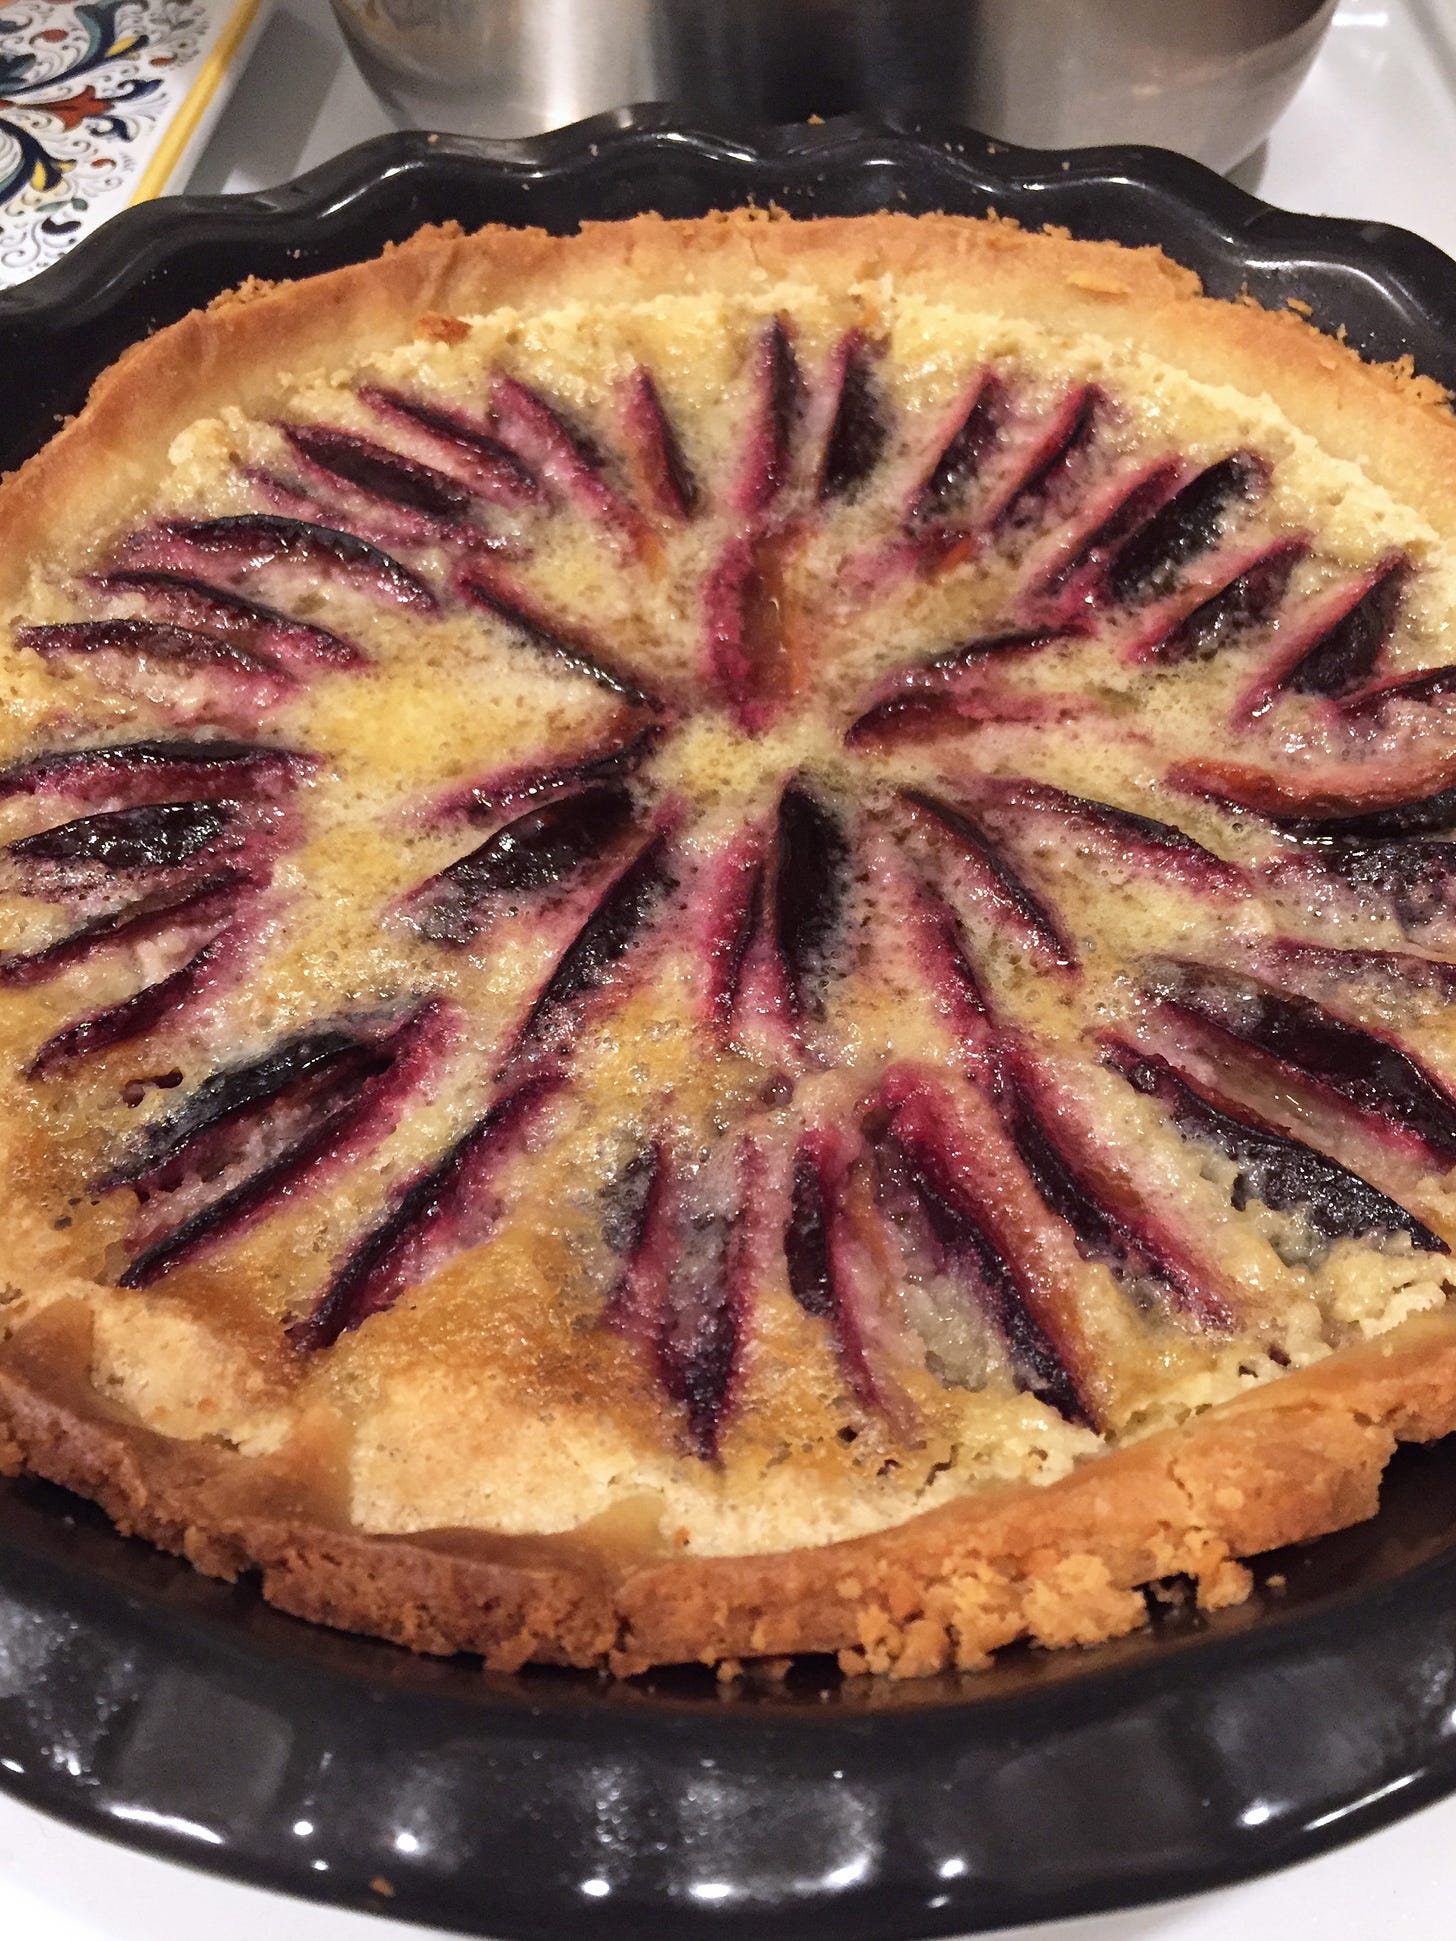 In a black ceramic pie pan, concentric circles of dark-skinned plum slices sit sunken into a frangipane tart with browned edges.